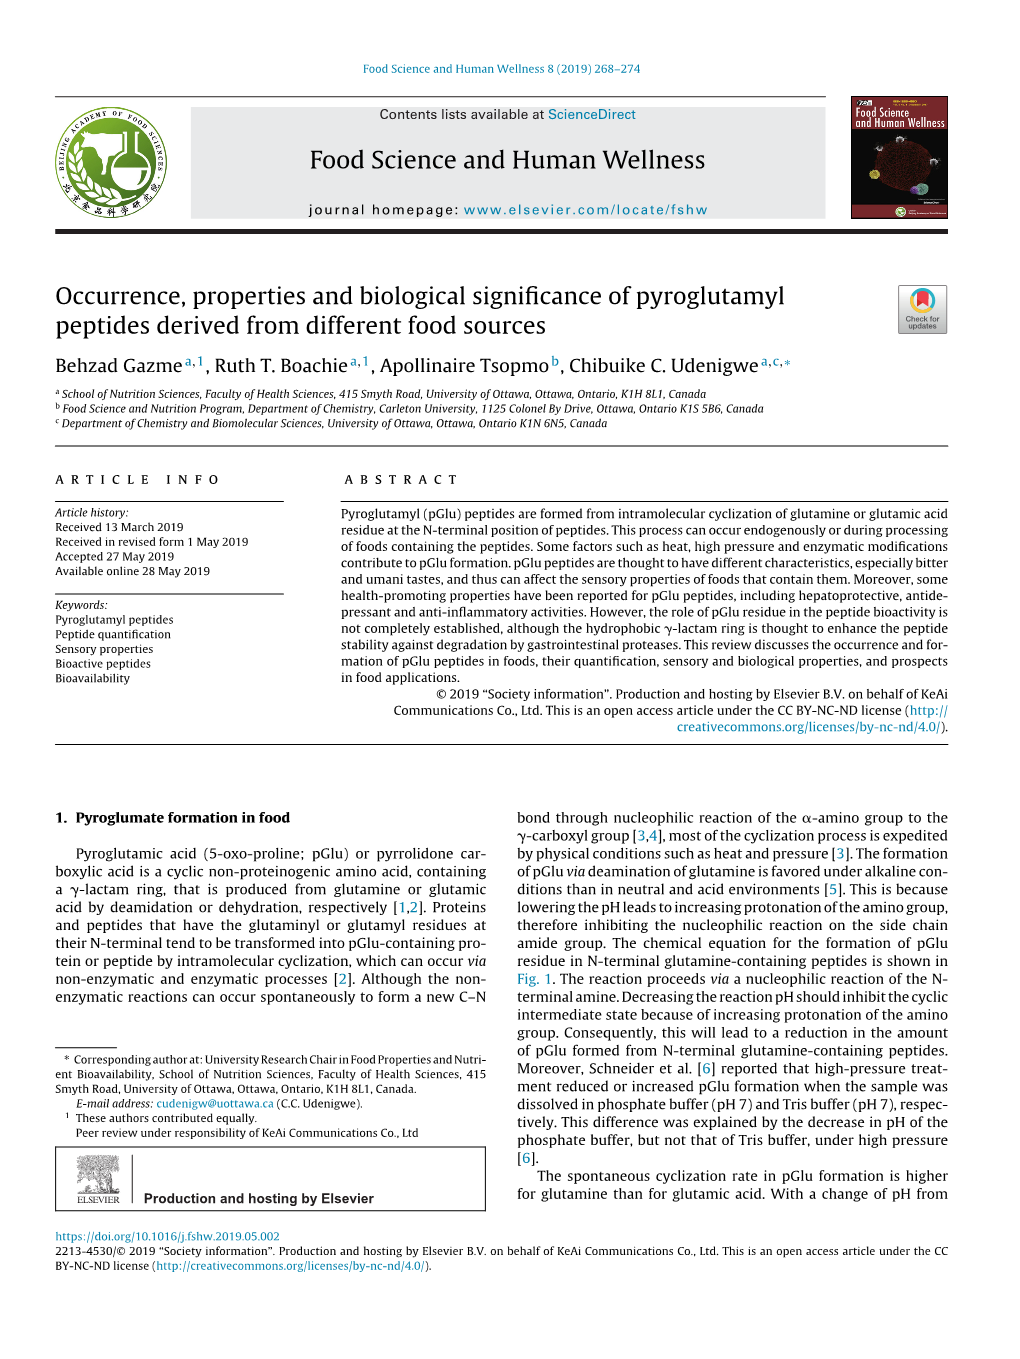 Occurrence, Properties and Biological Significance of Pyroglutamyl